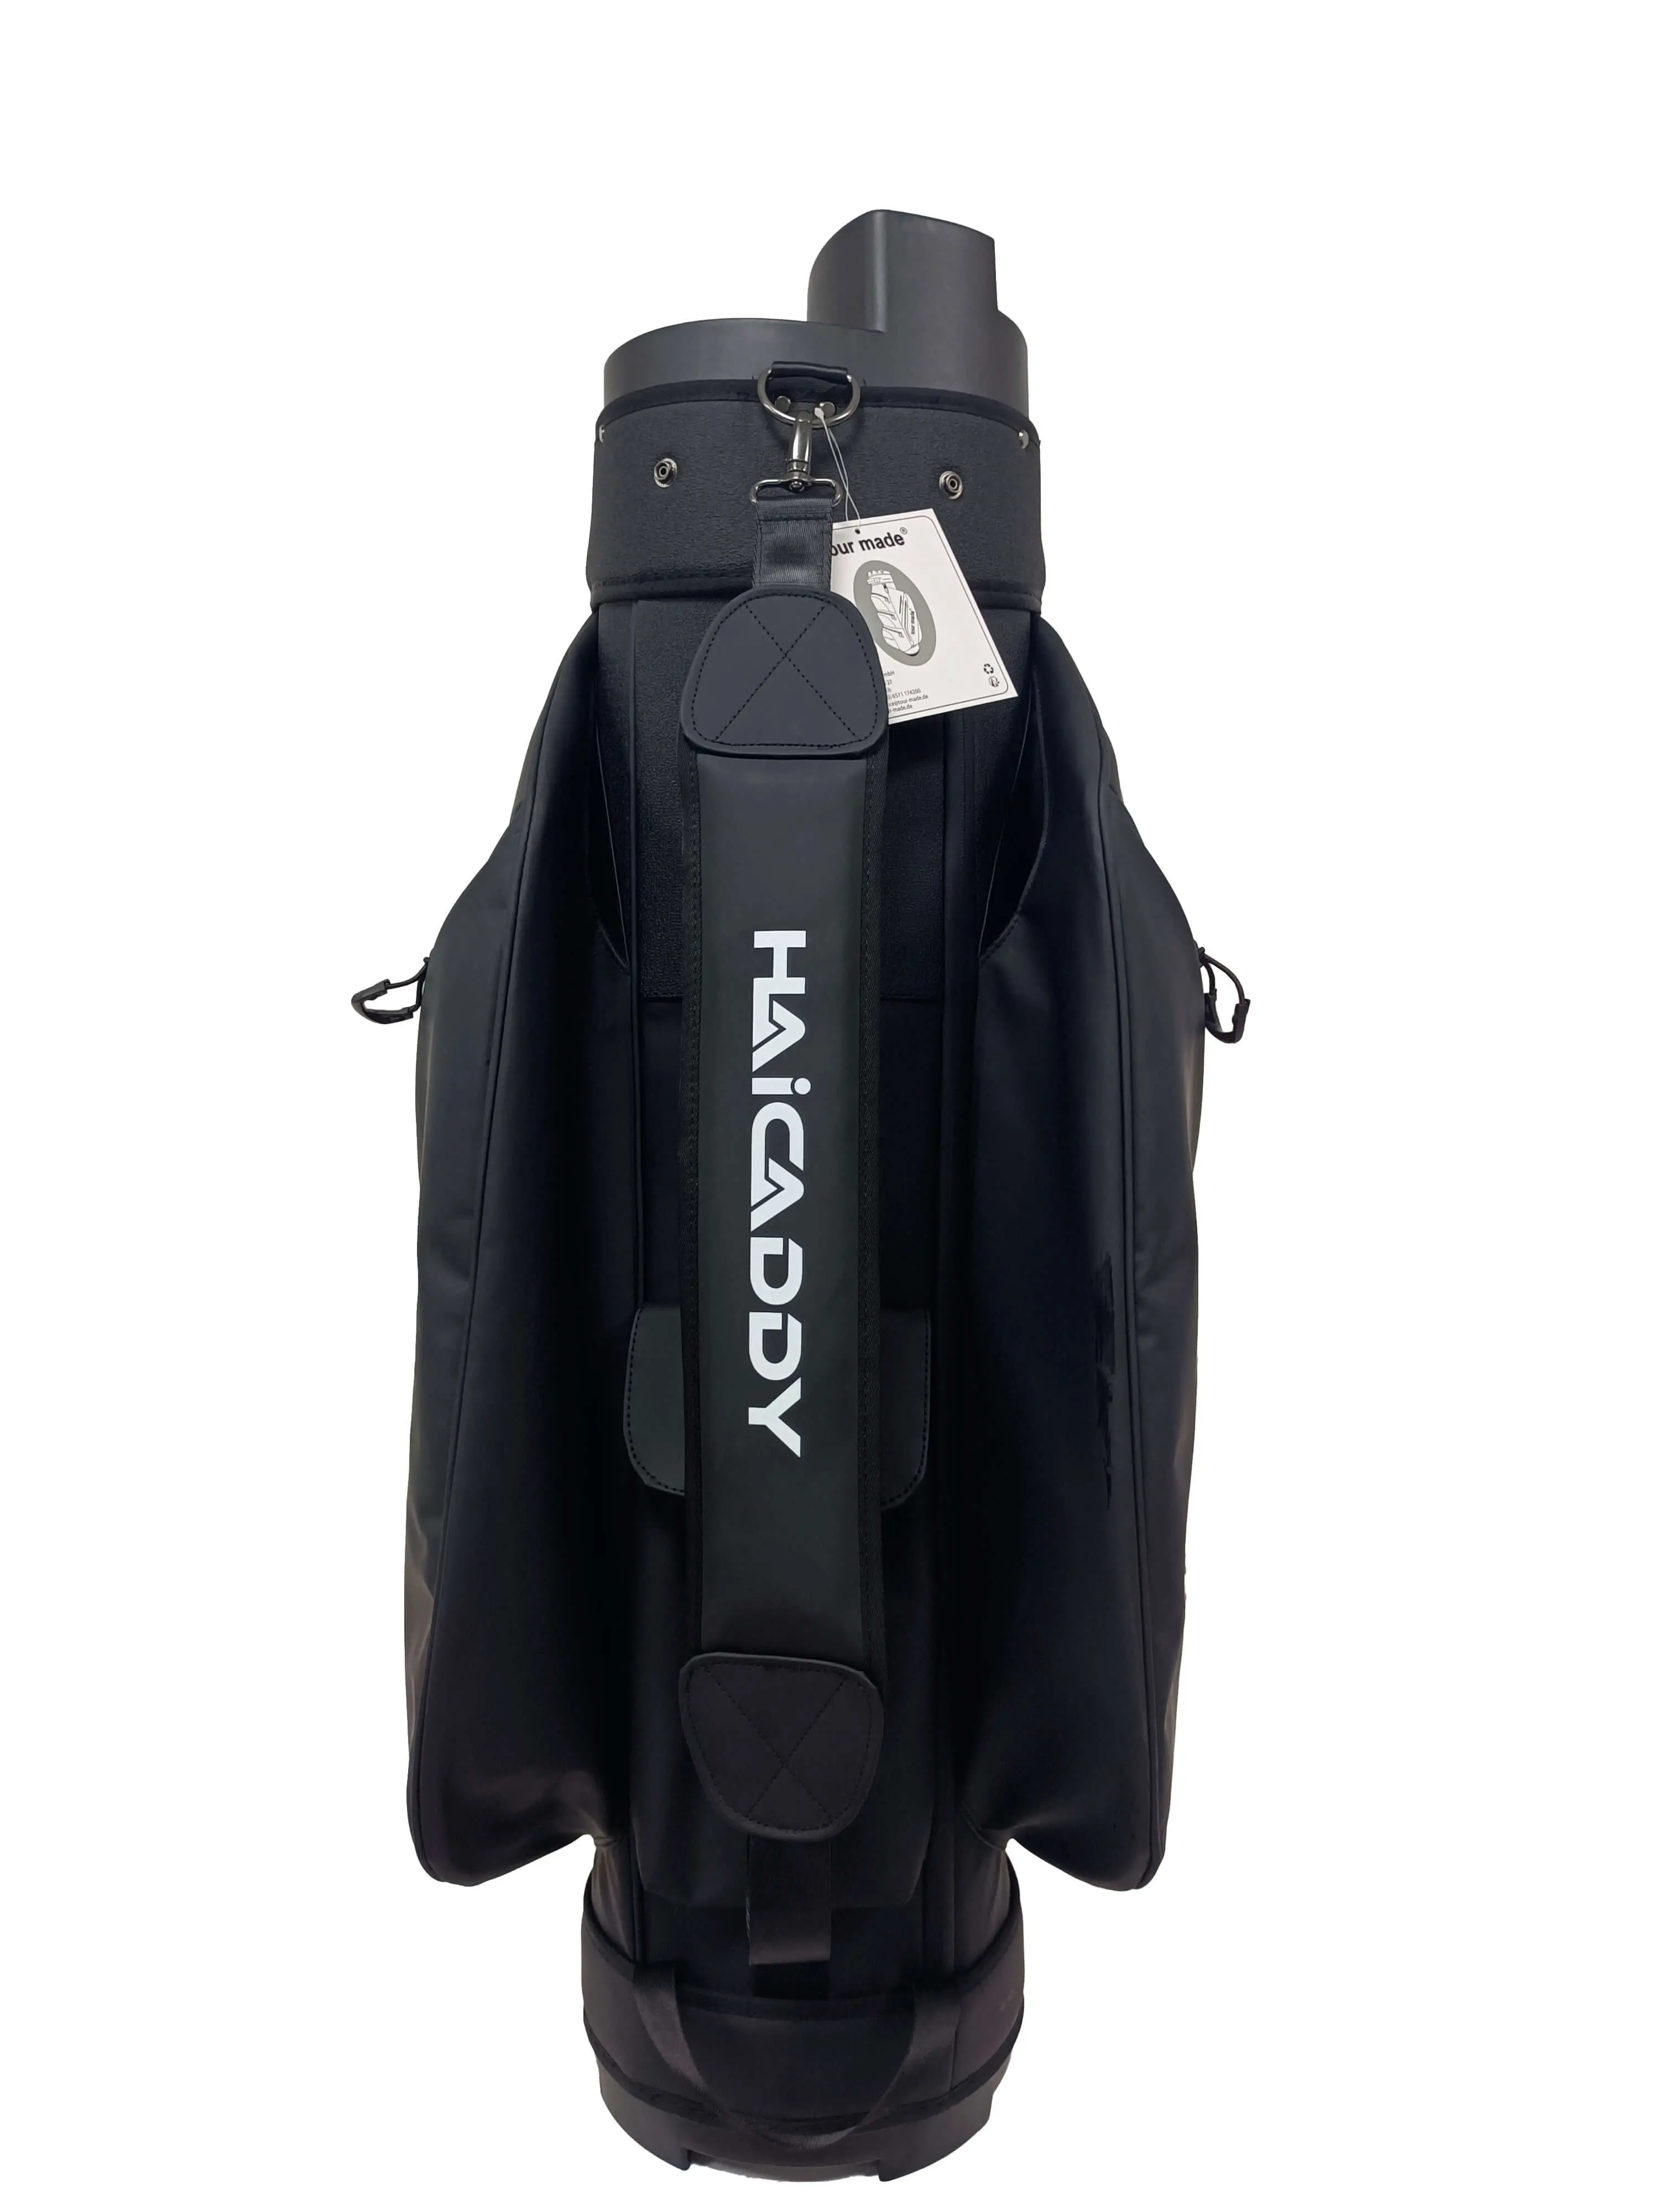 PRE-SALE Haicaddy Deluxe Organiser golf bag with magnetic pocket